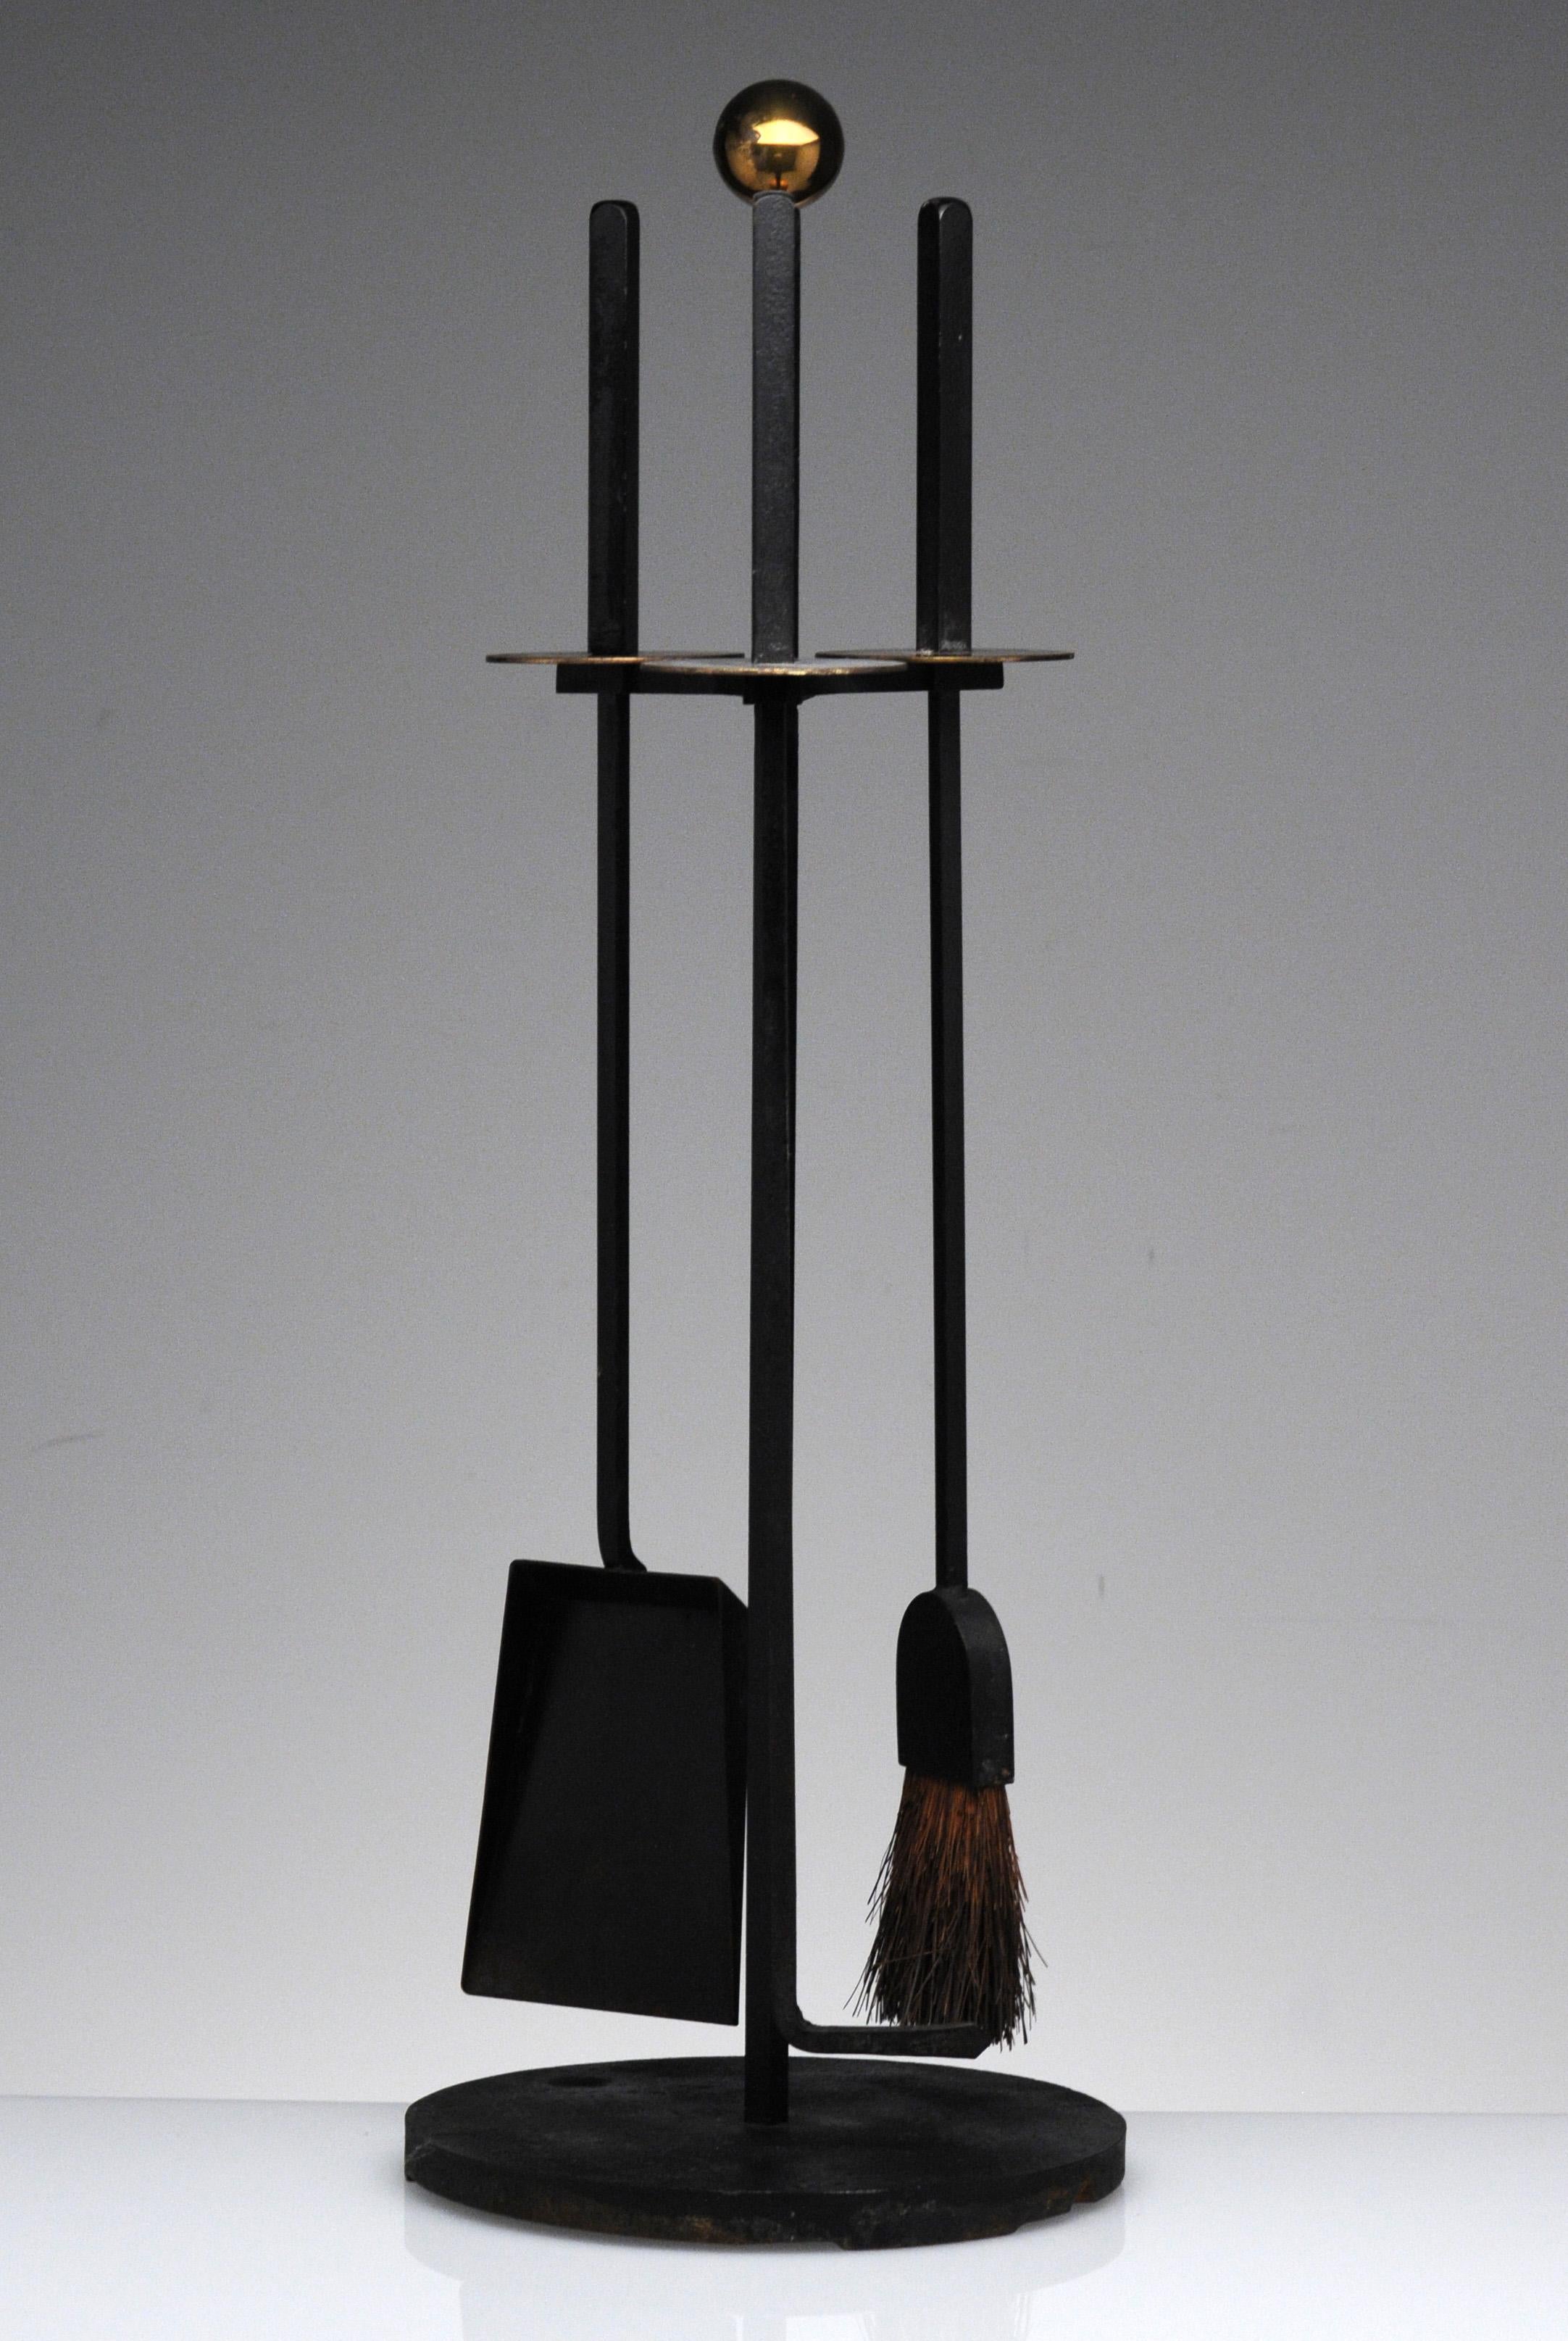 Cast iron and brass Mid-Century Modern design by Mel Bogart for Stewart-Winthrop. Set includes hearth broom, poker, shovel and stand. Good Design paper label to underside.